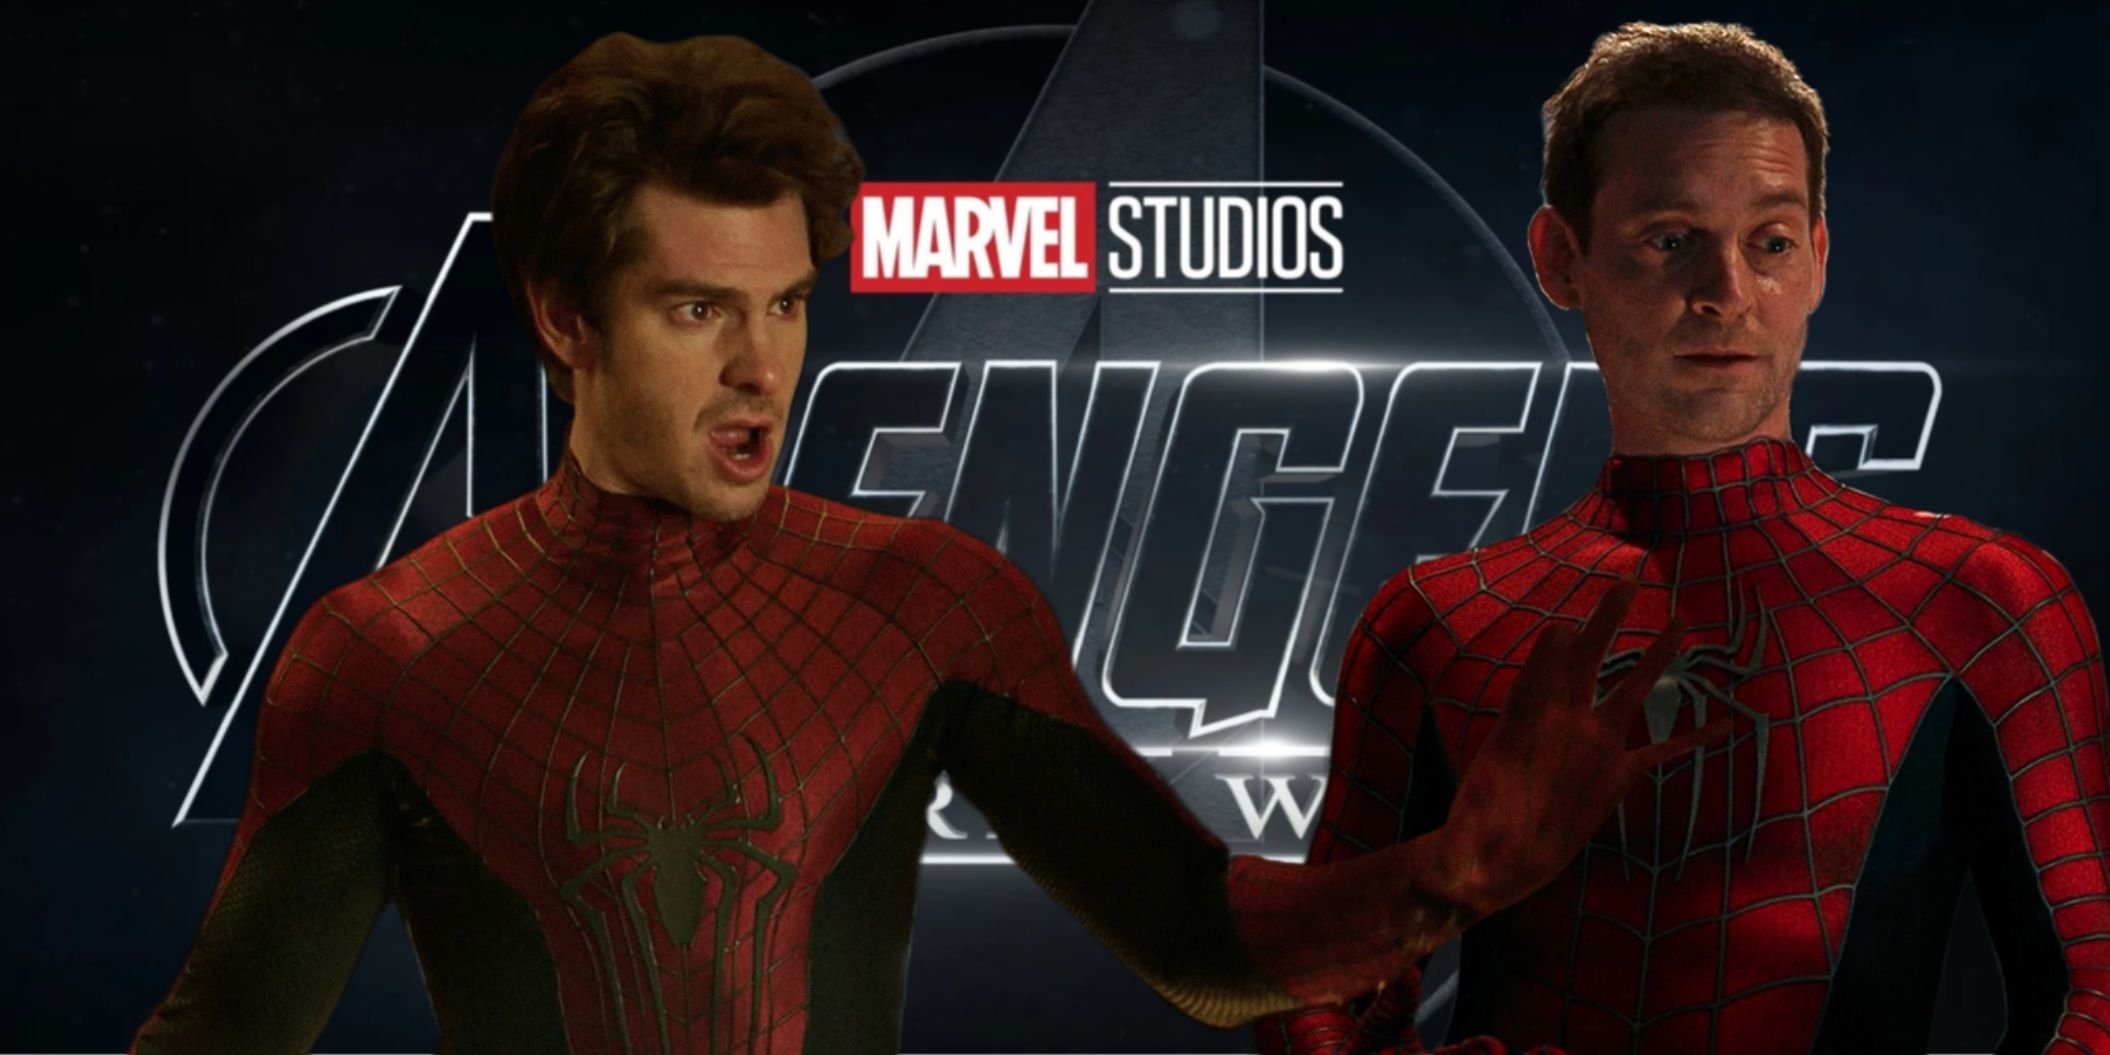 Andrew Garfield and Tobey Maguire as Spider-Man with the Avengers Secret Wars logo